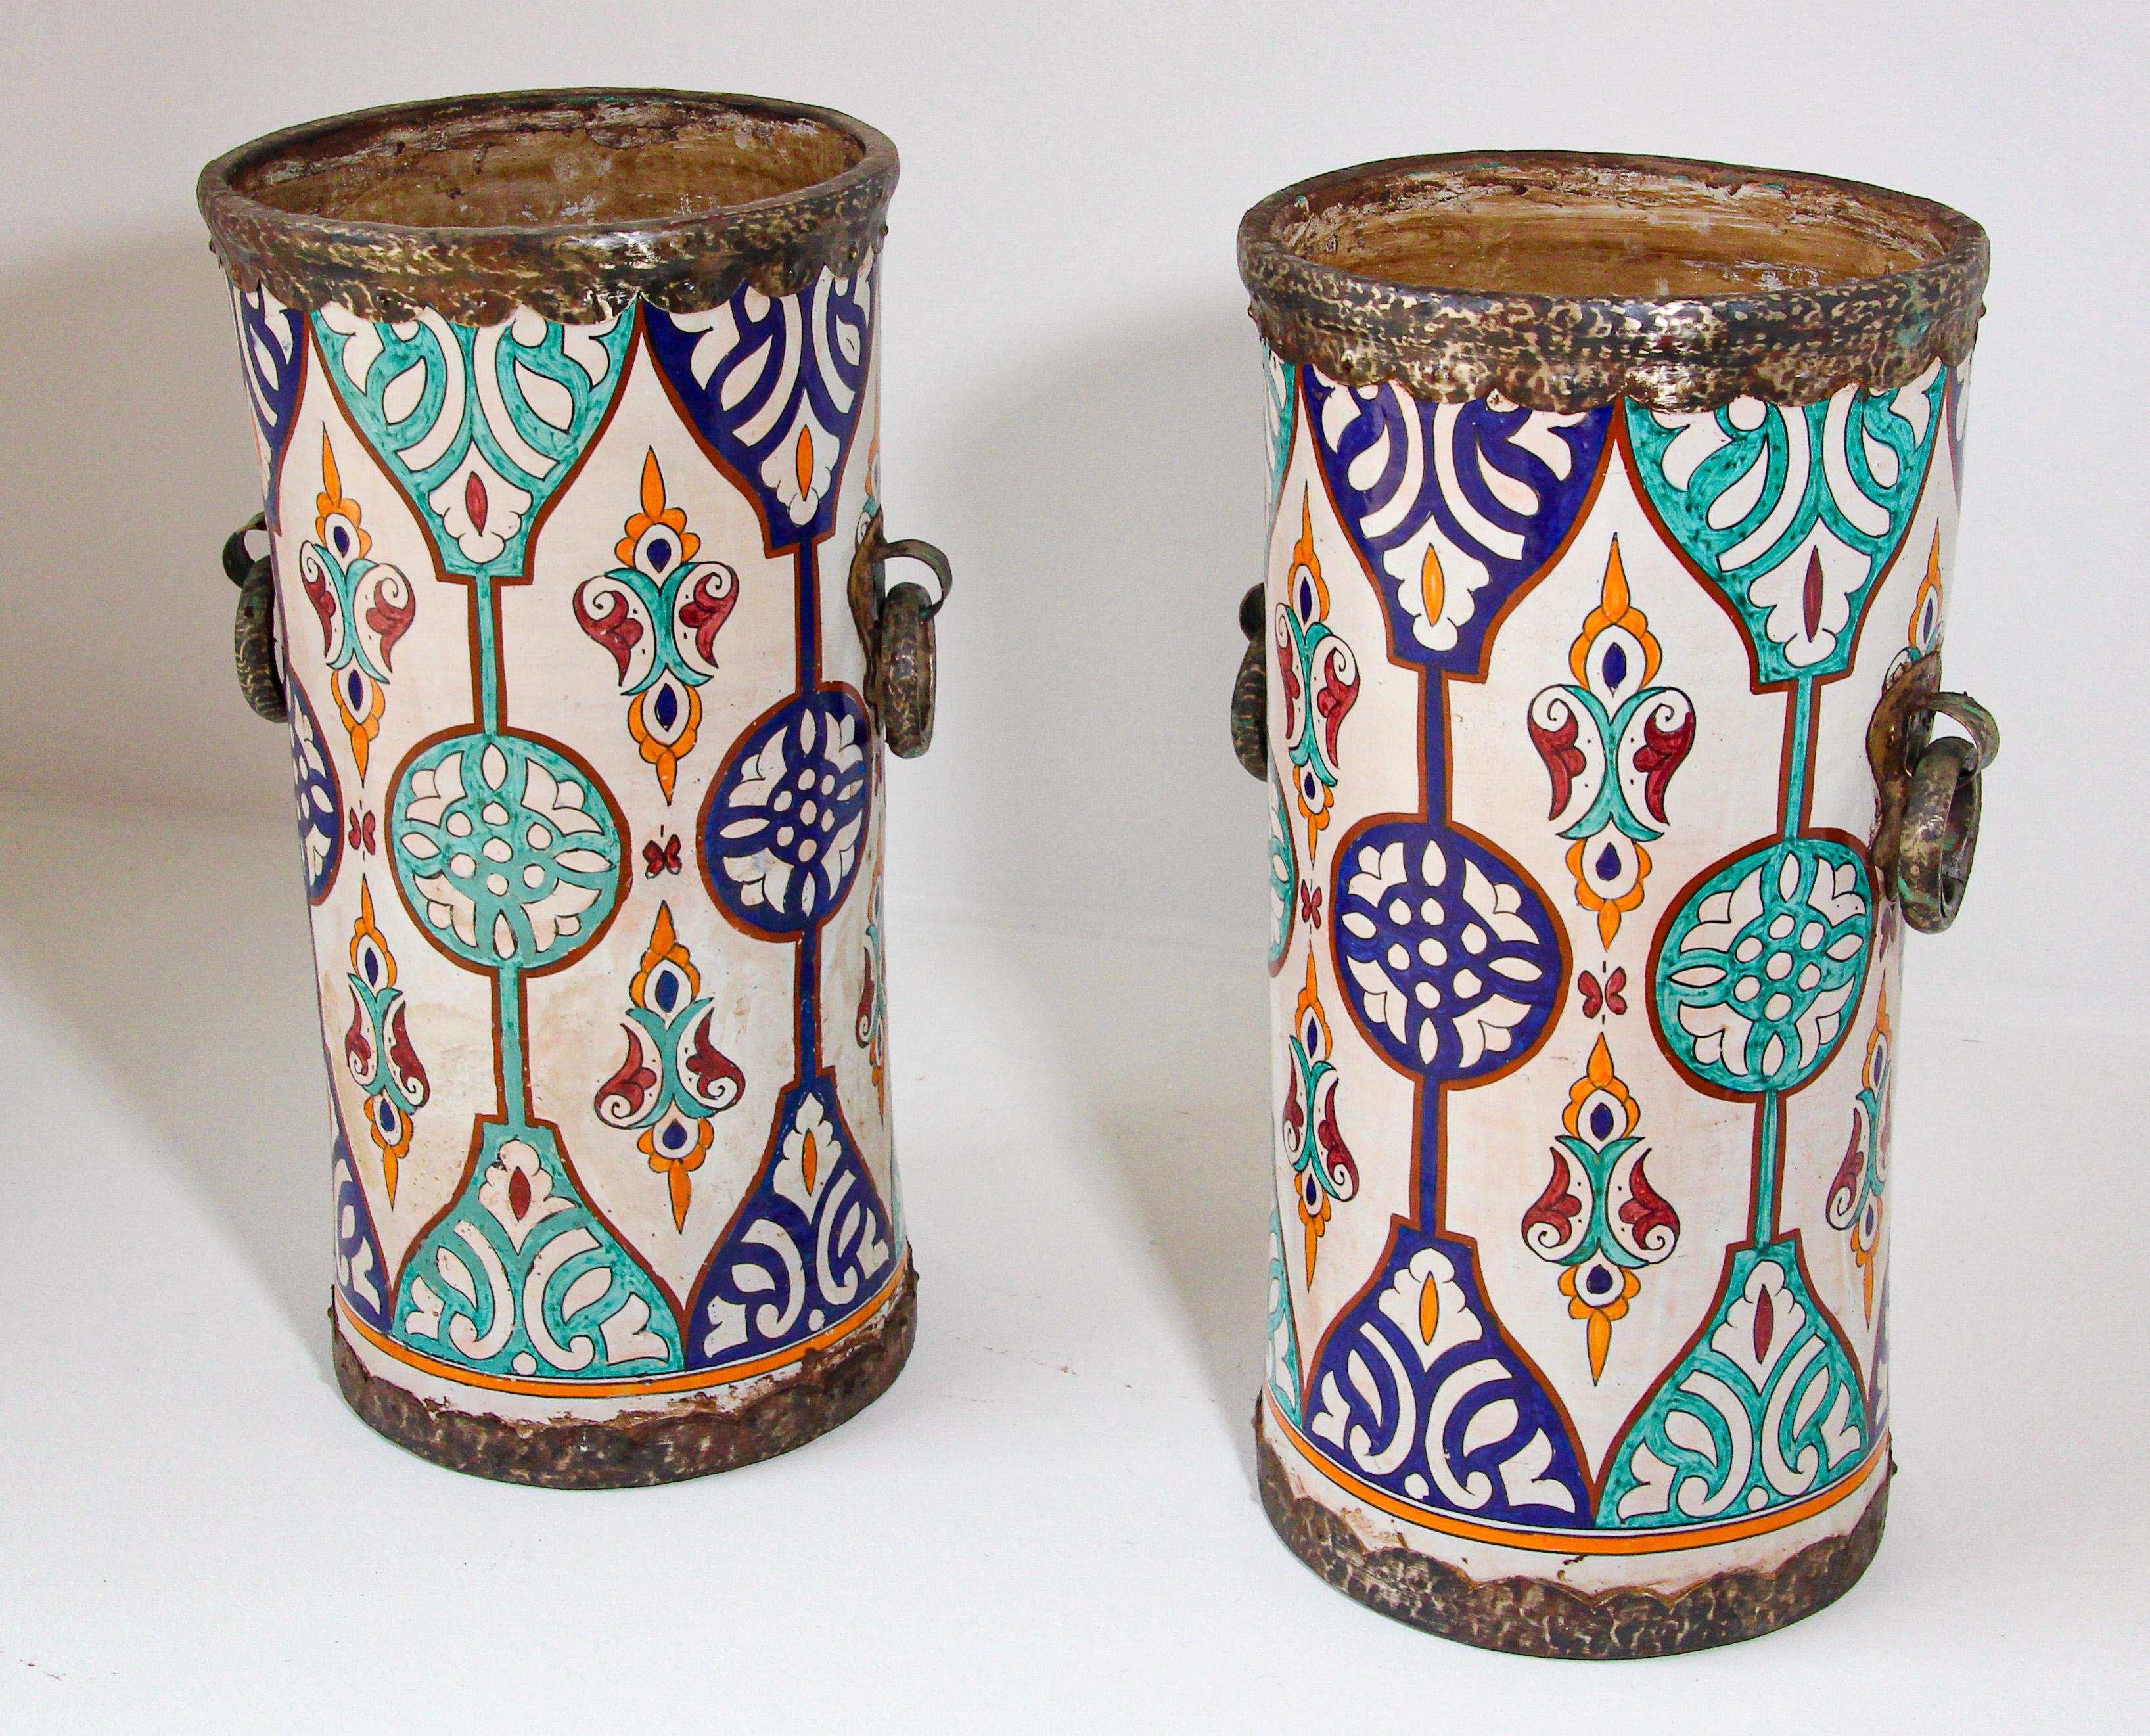 Pair of very decorative large handcrafted Moorish, Spanish style ceramic urns from Fez, 
Metal handles, bottom and top adorned with embossed metal.
Great decorative large ceramic vessels to use as planters, umbrella or can stand.
Will make a